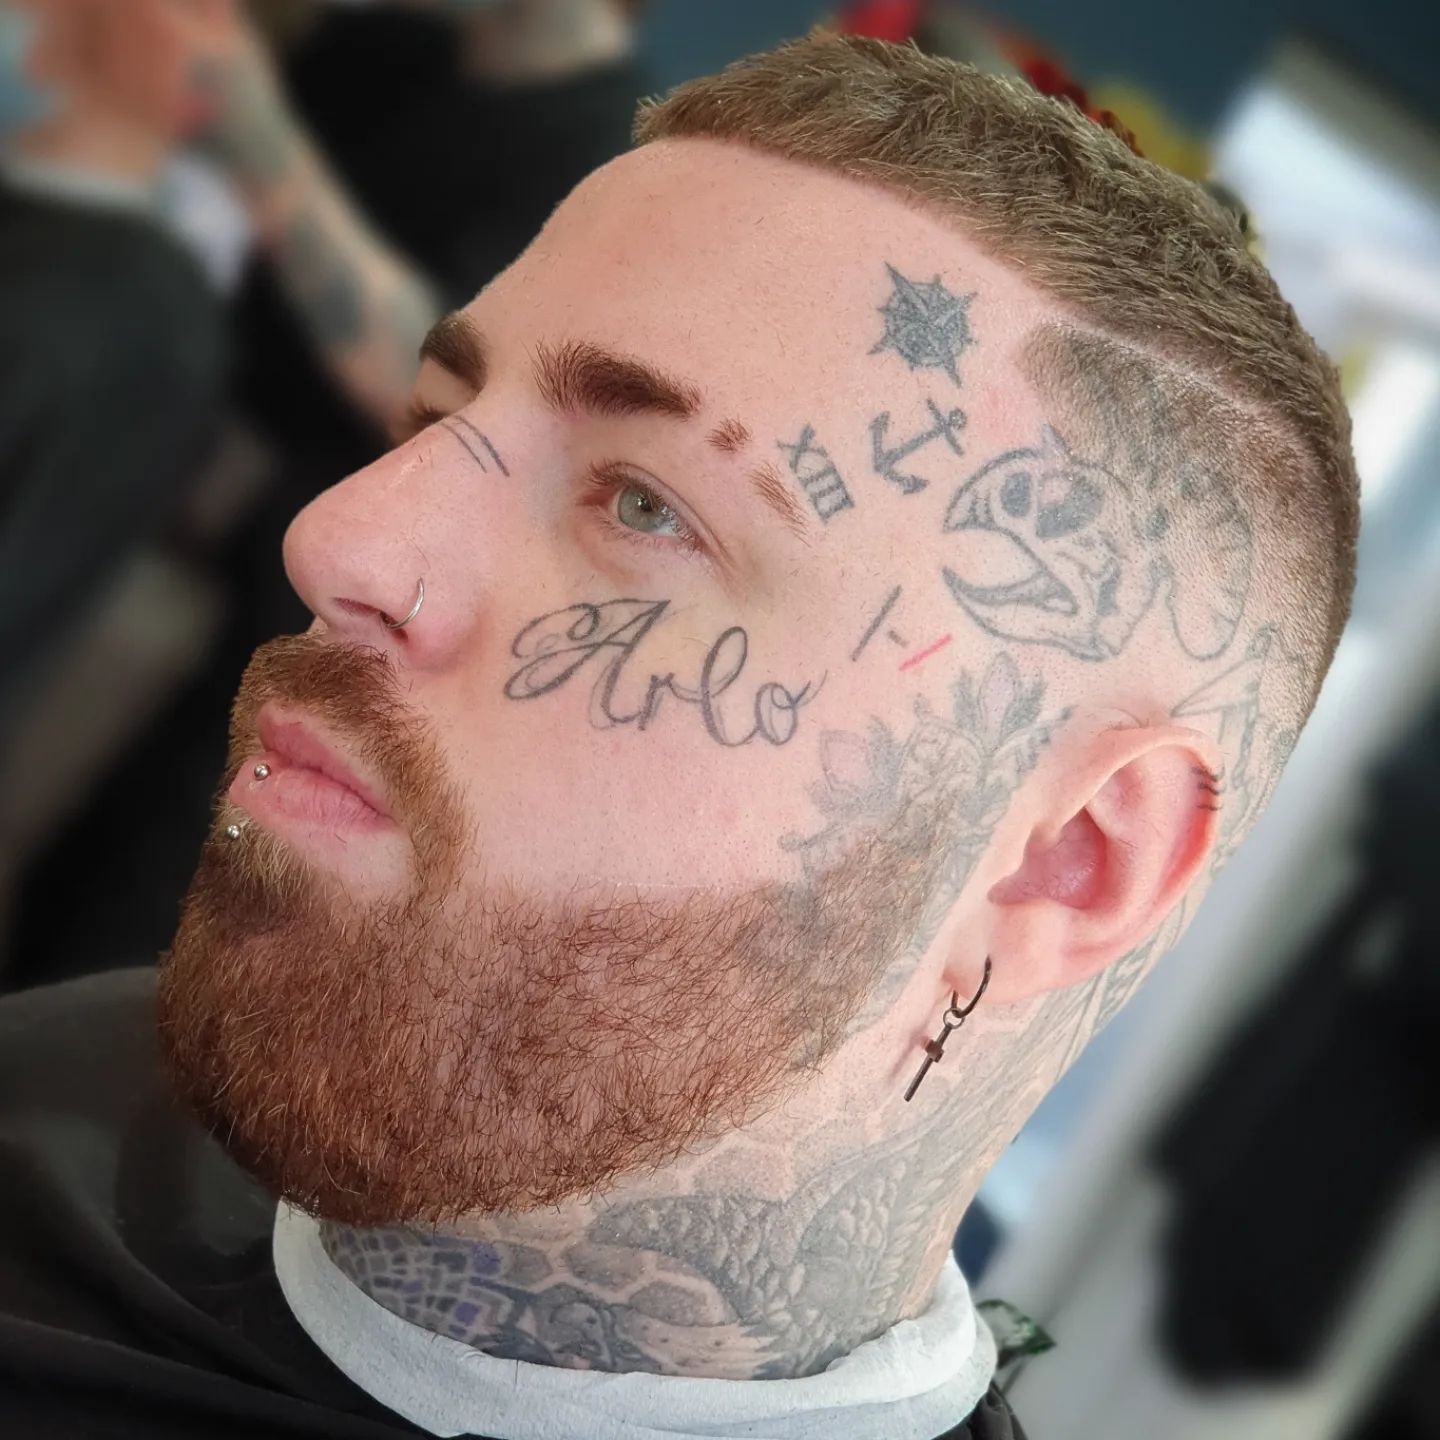 This head tattoo has a ton of different designs. It just goes to show you that you can rock a ton of different designs and that they will still look good as they fade. Fancy trying out a new tattoo?